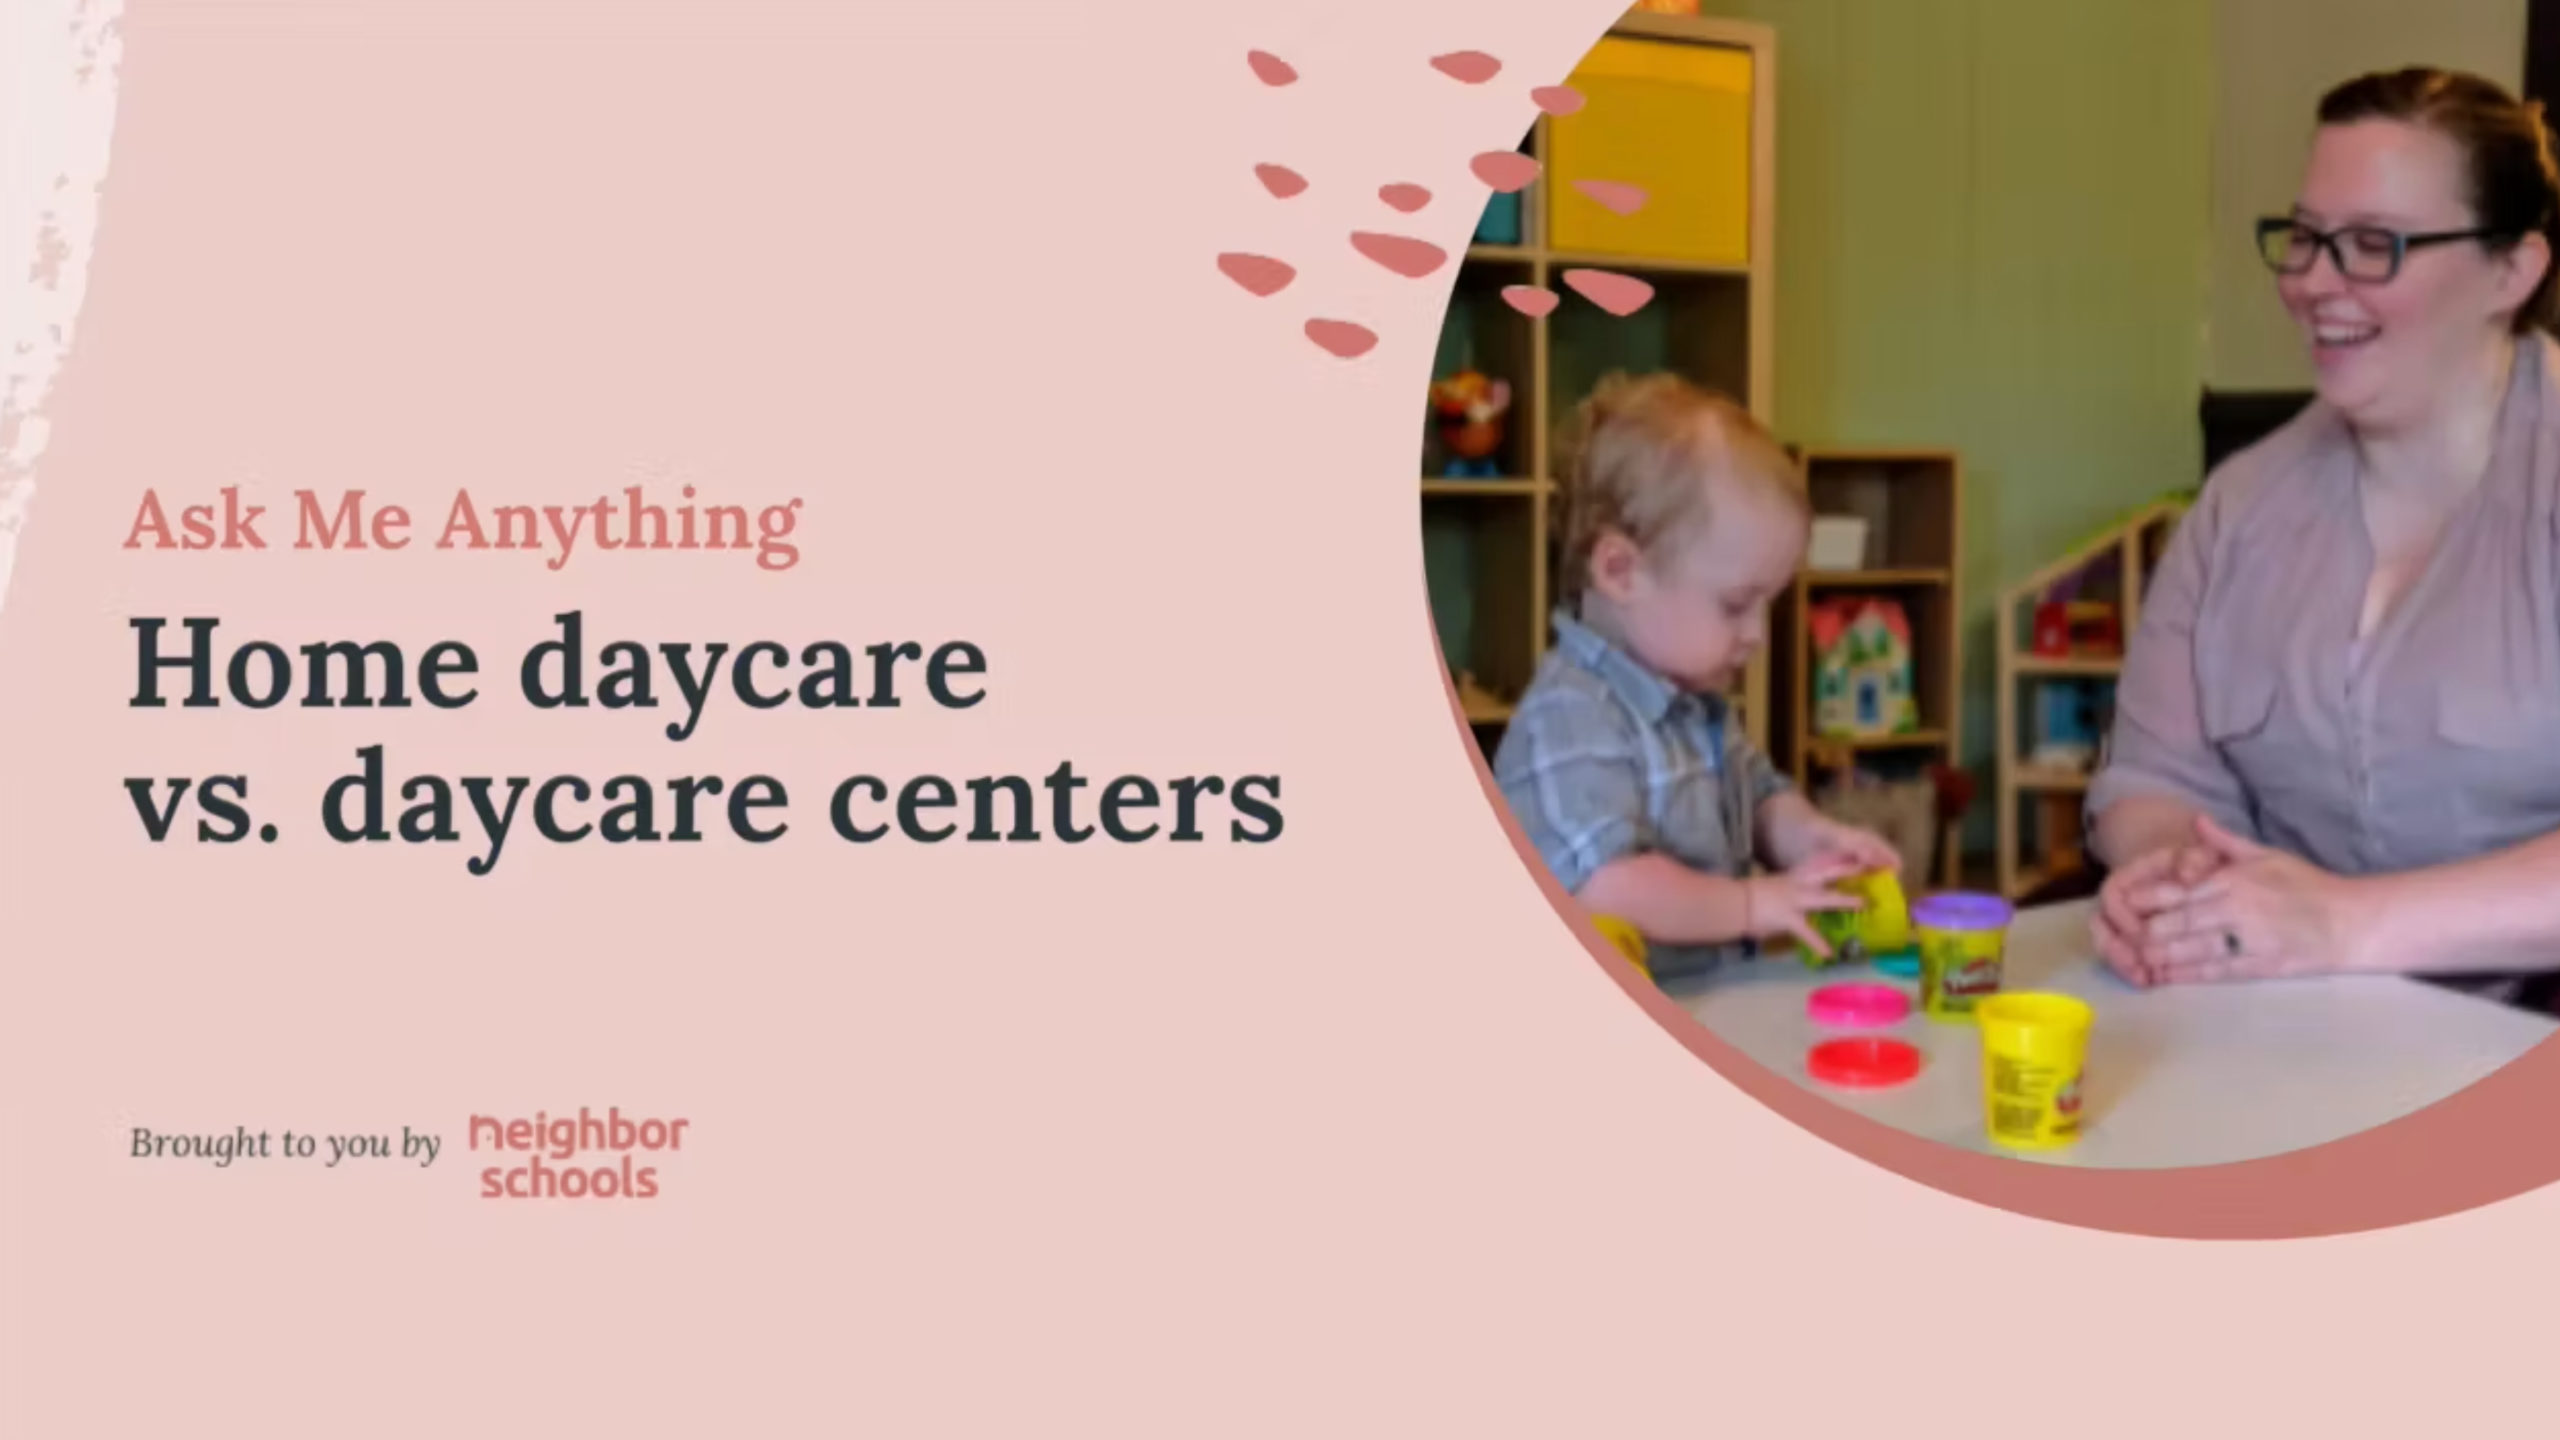 owning a home daycare vs working in a daycare center or preschool